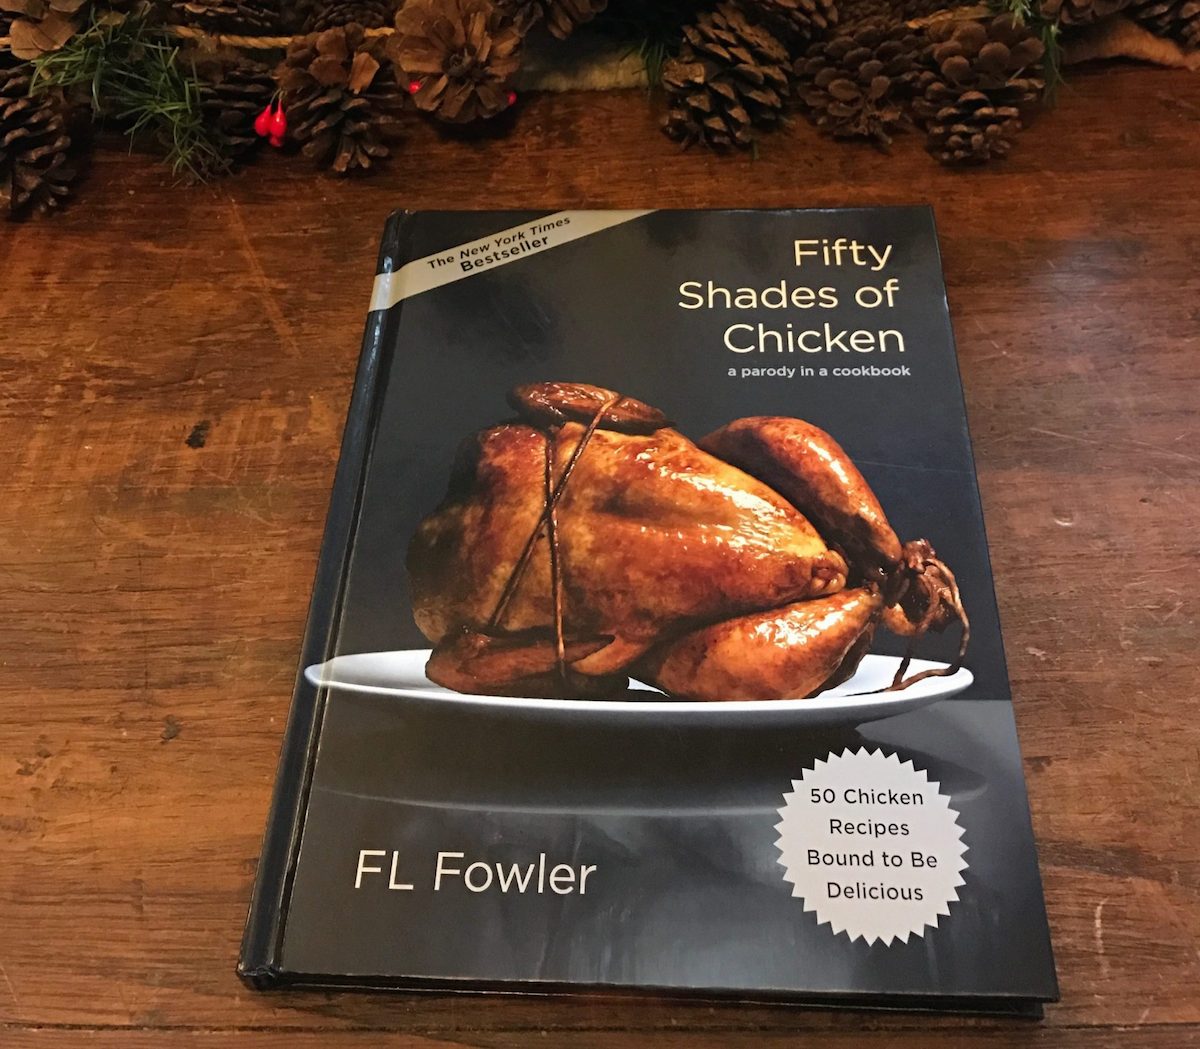 White Elephant Gifts, Gag Gifts, Funny Gift Ideas – 50 shades of chicken cookbook